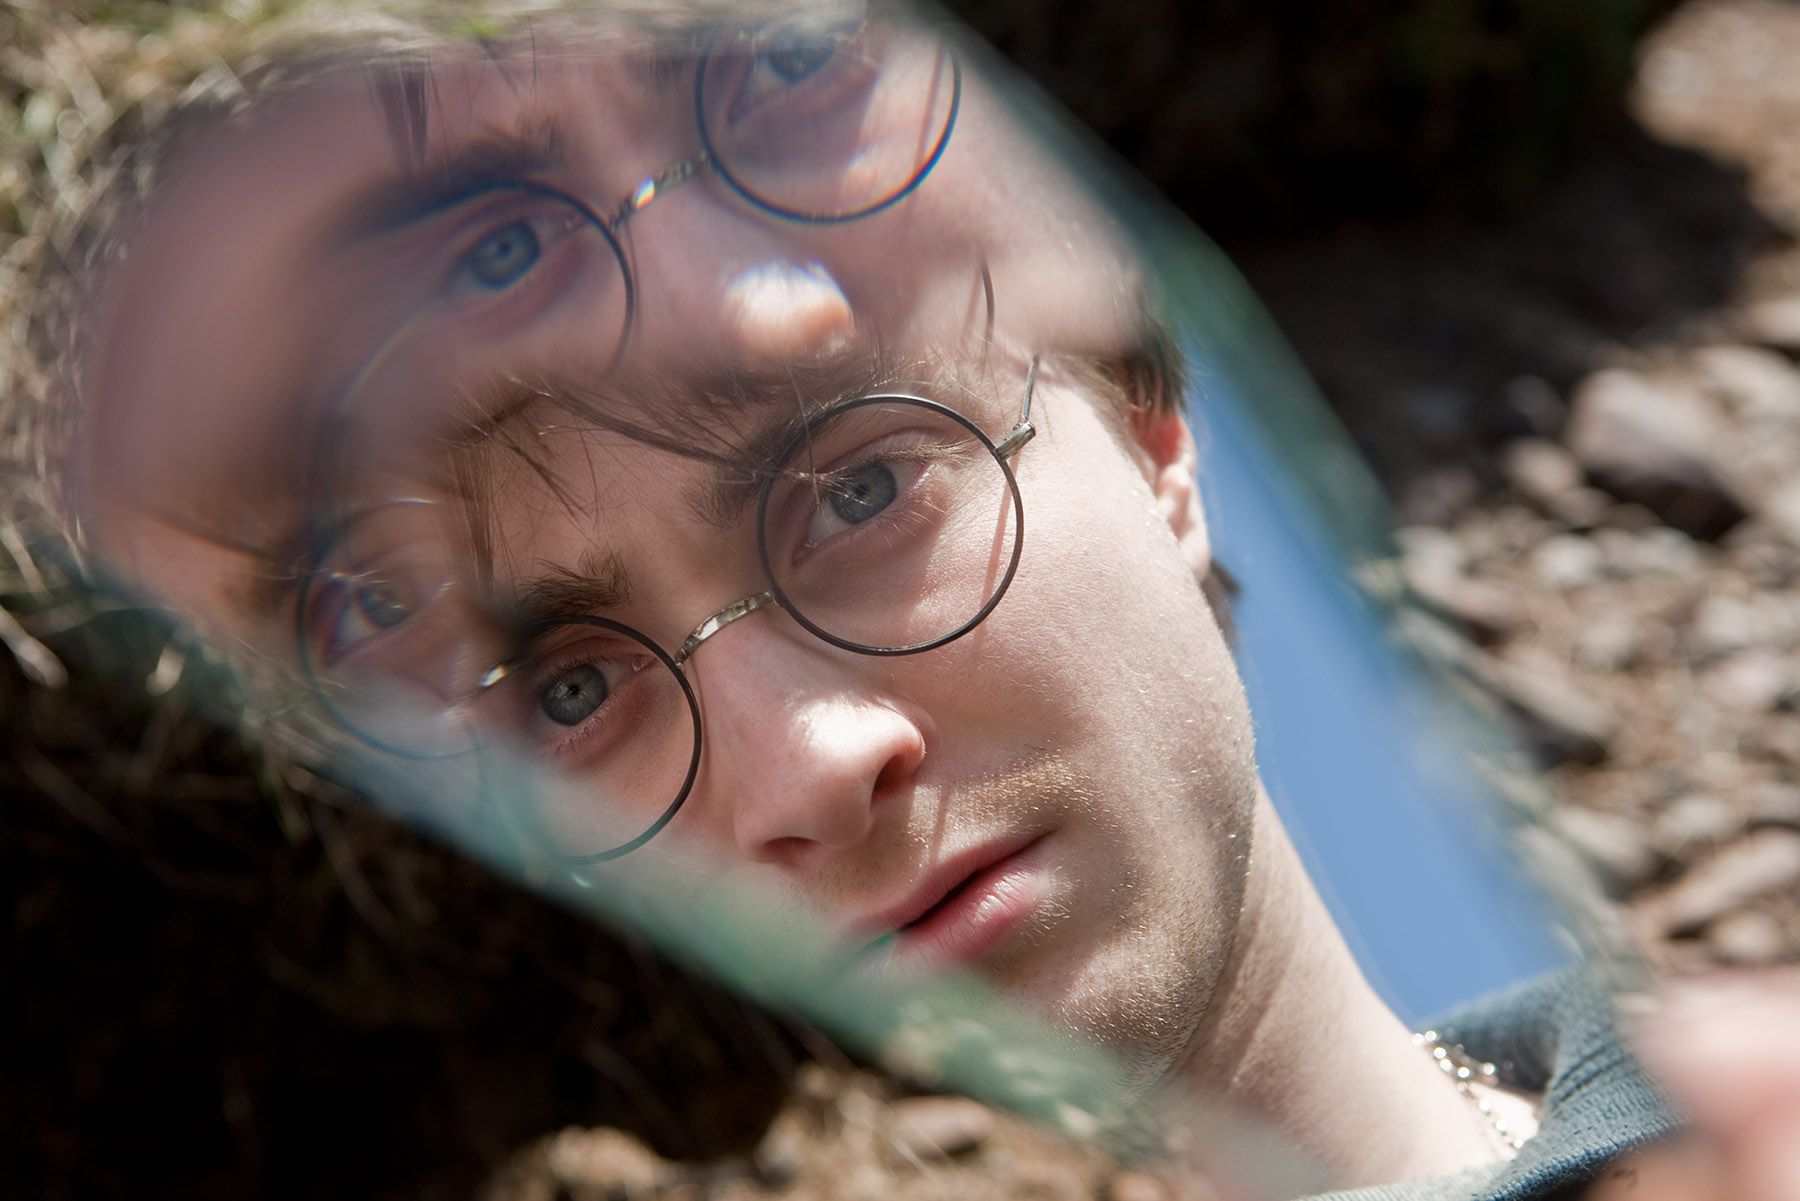 Daniel Radcliffe reflects on Harry Potter and the Deathly Hallows